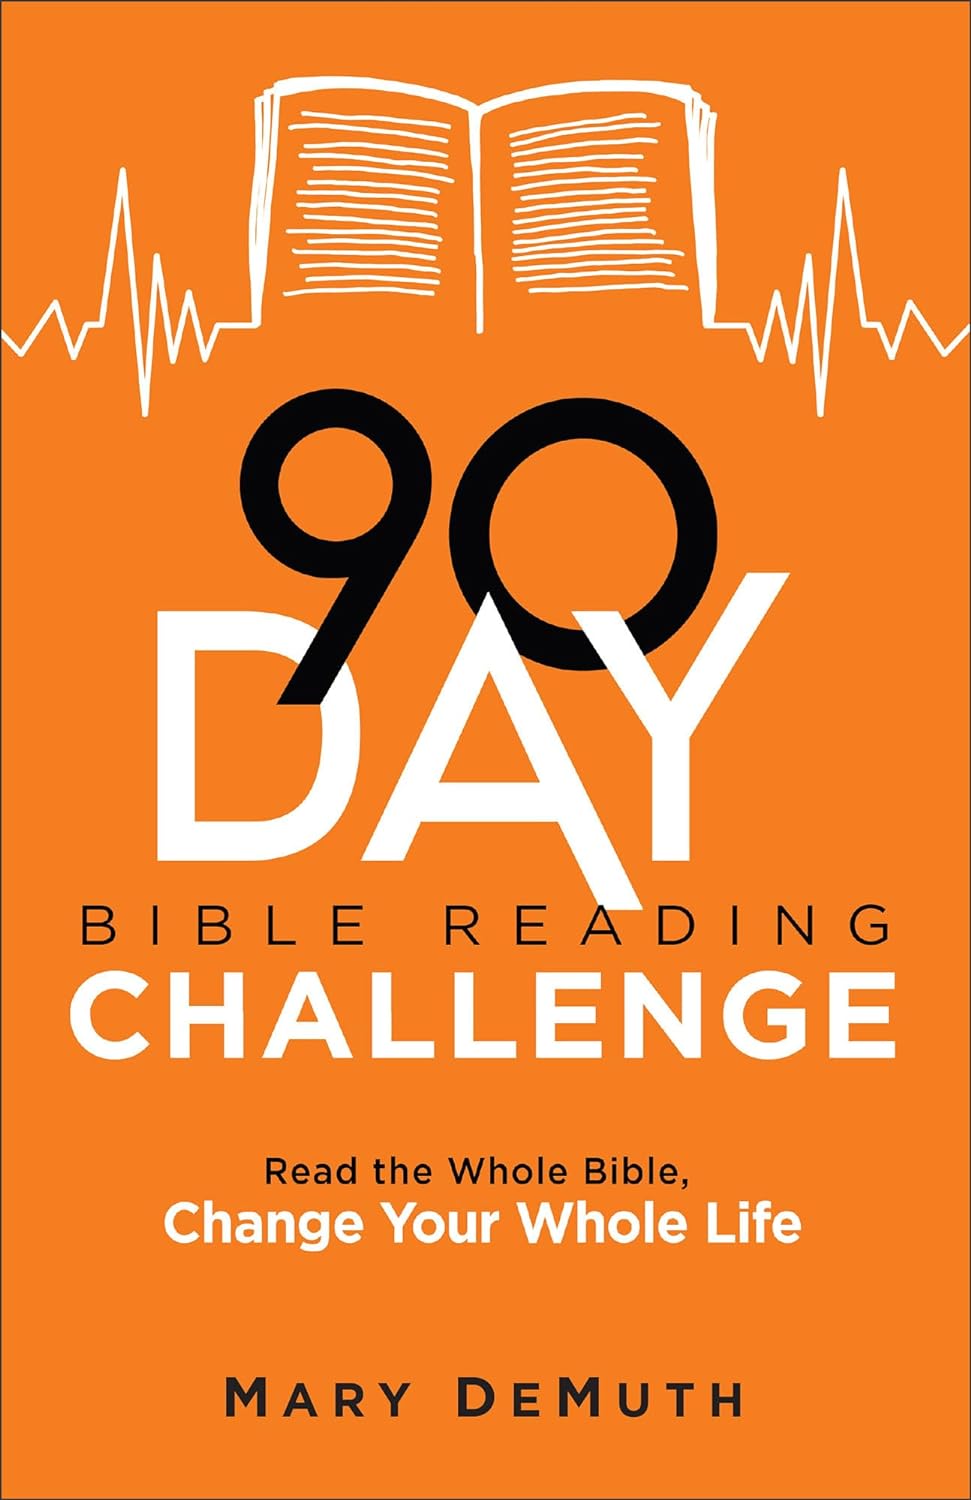 90 Day Bible reading